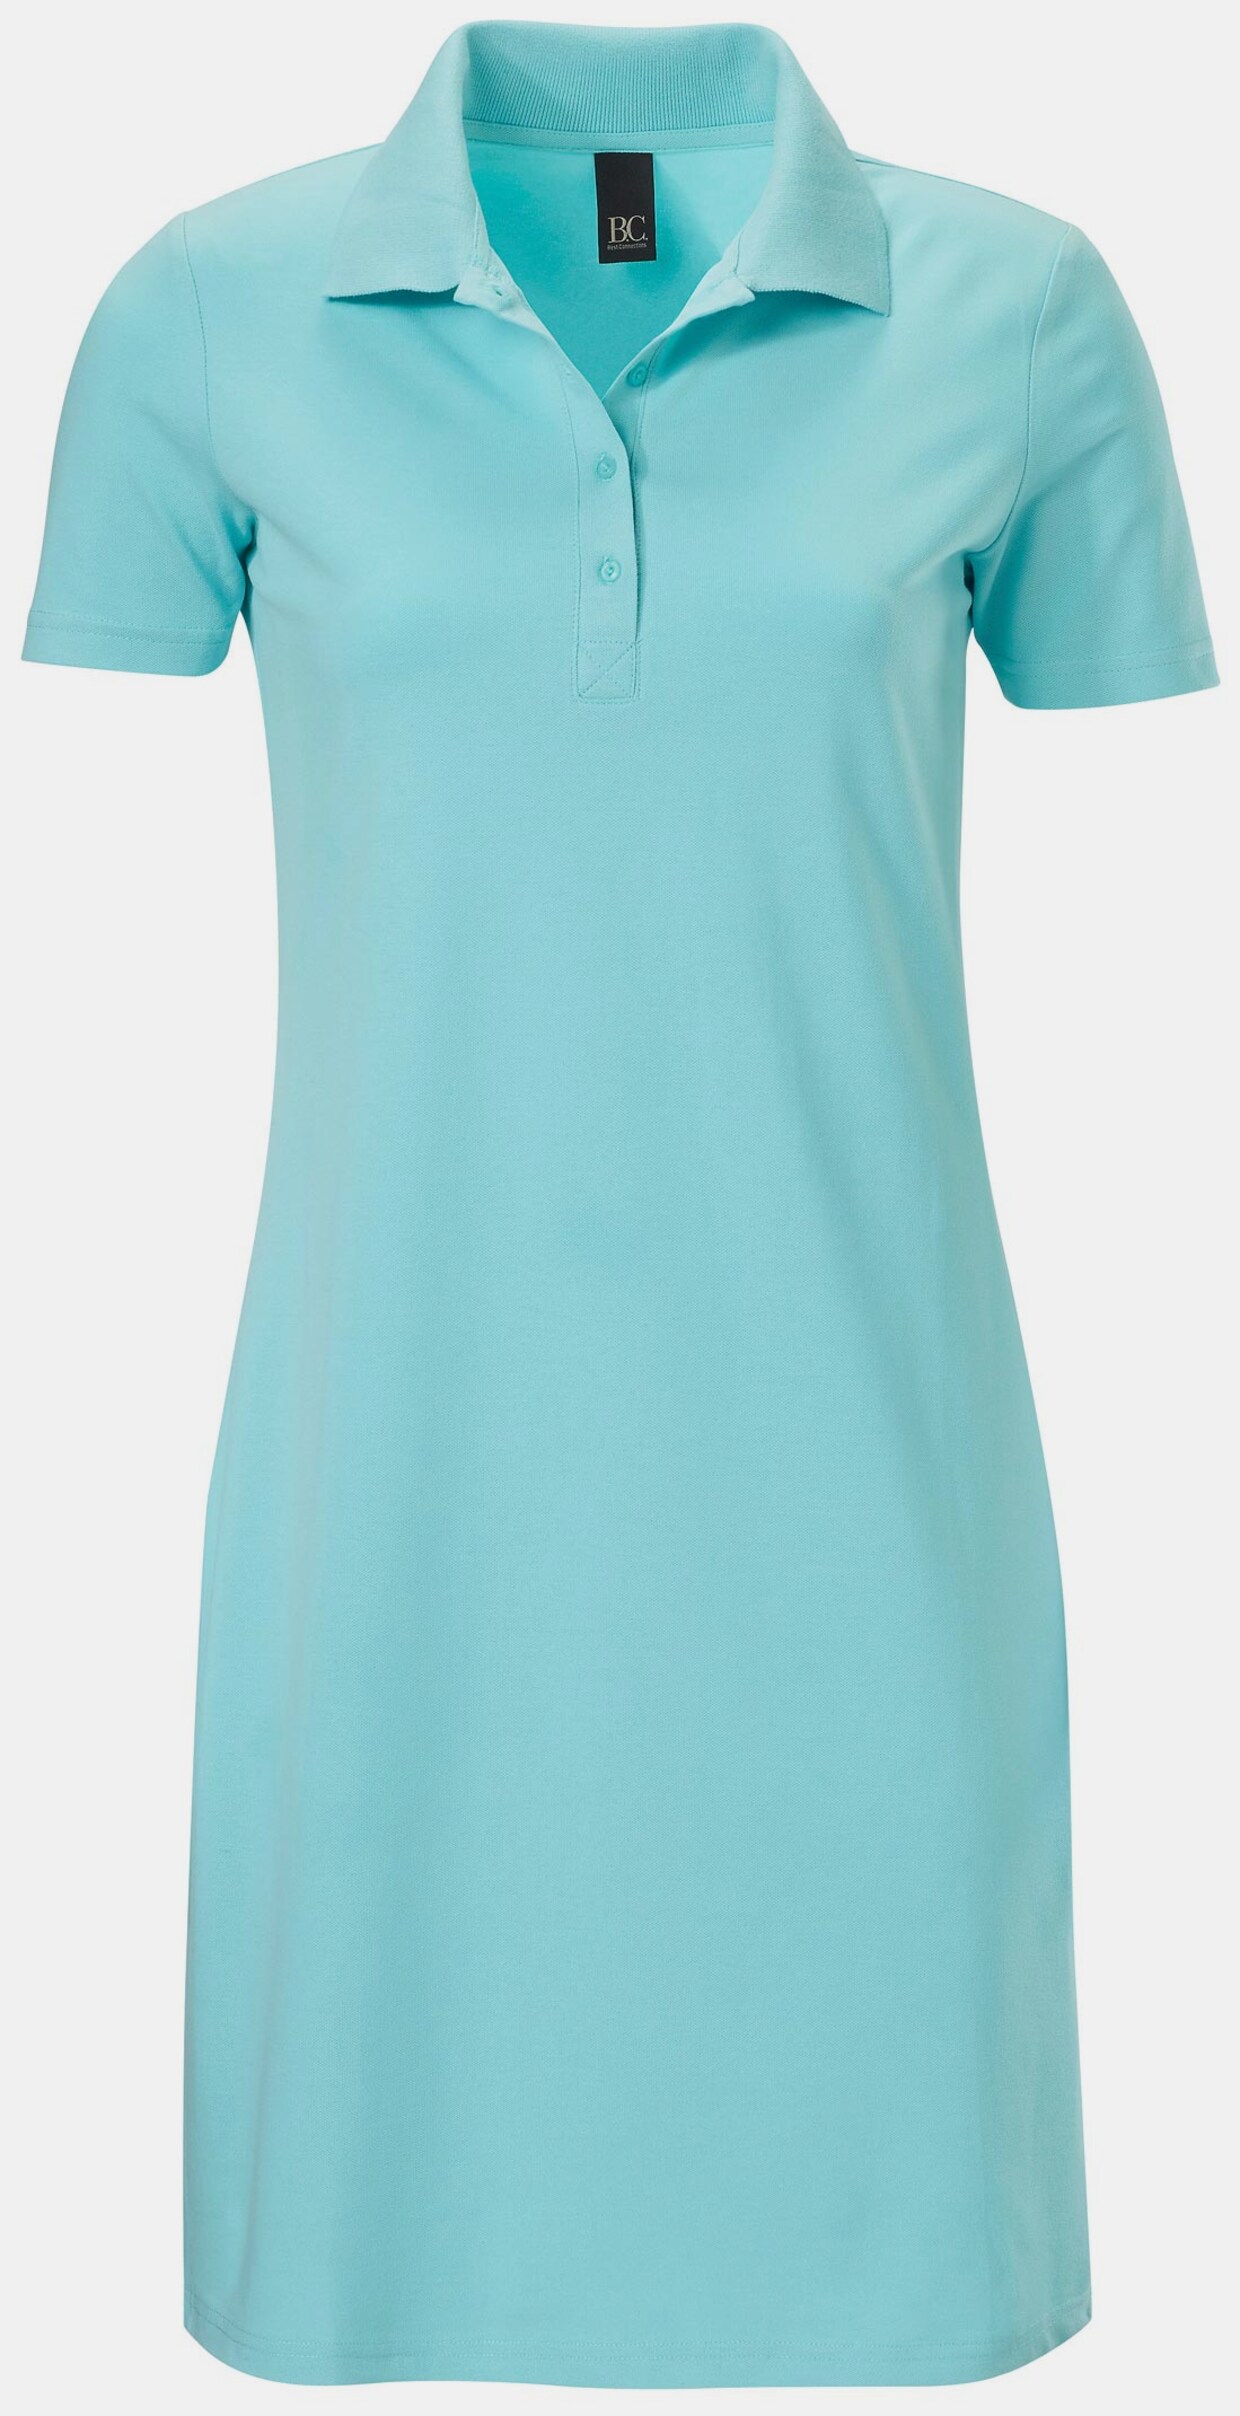 Best Connections Polojurk - turquoise